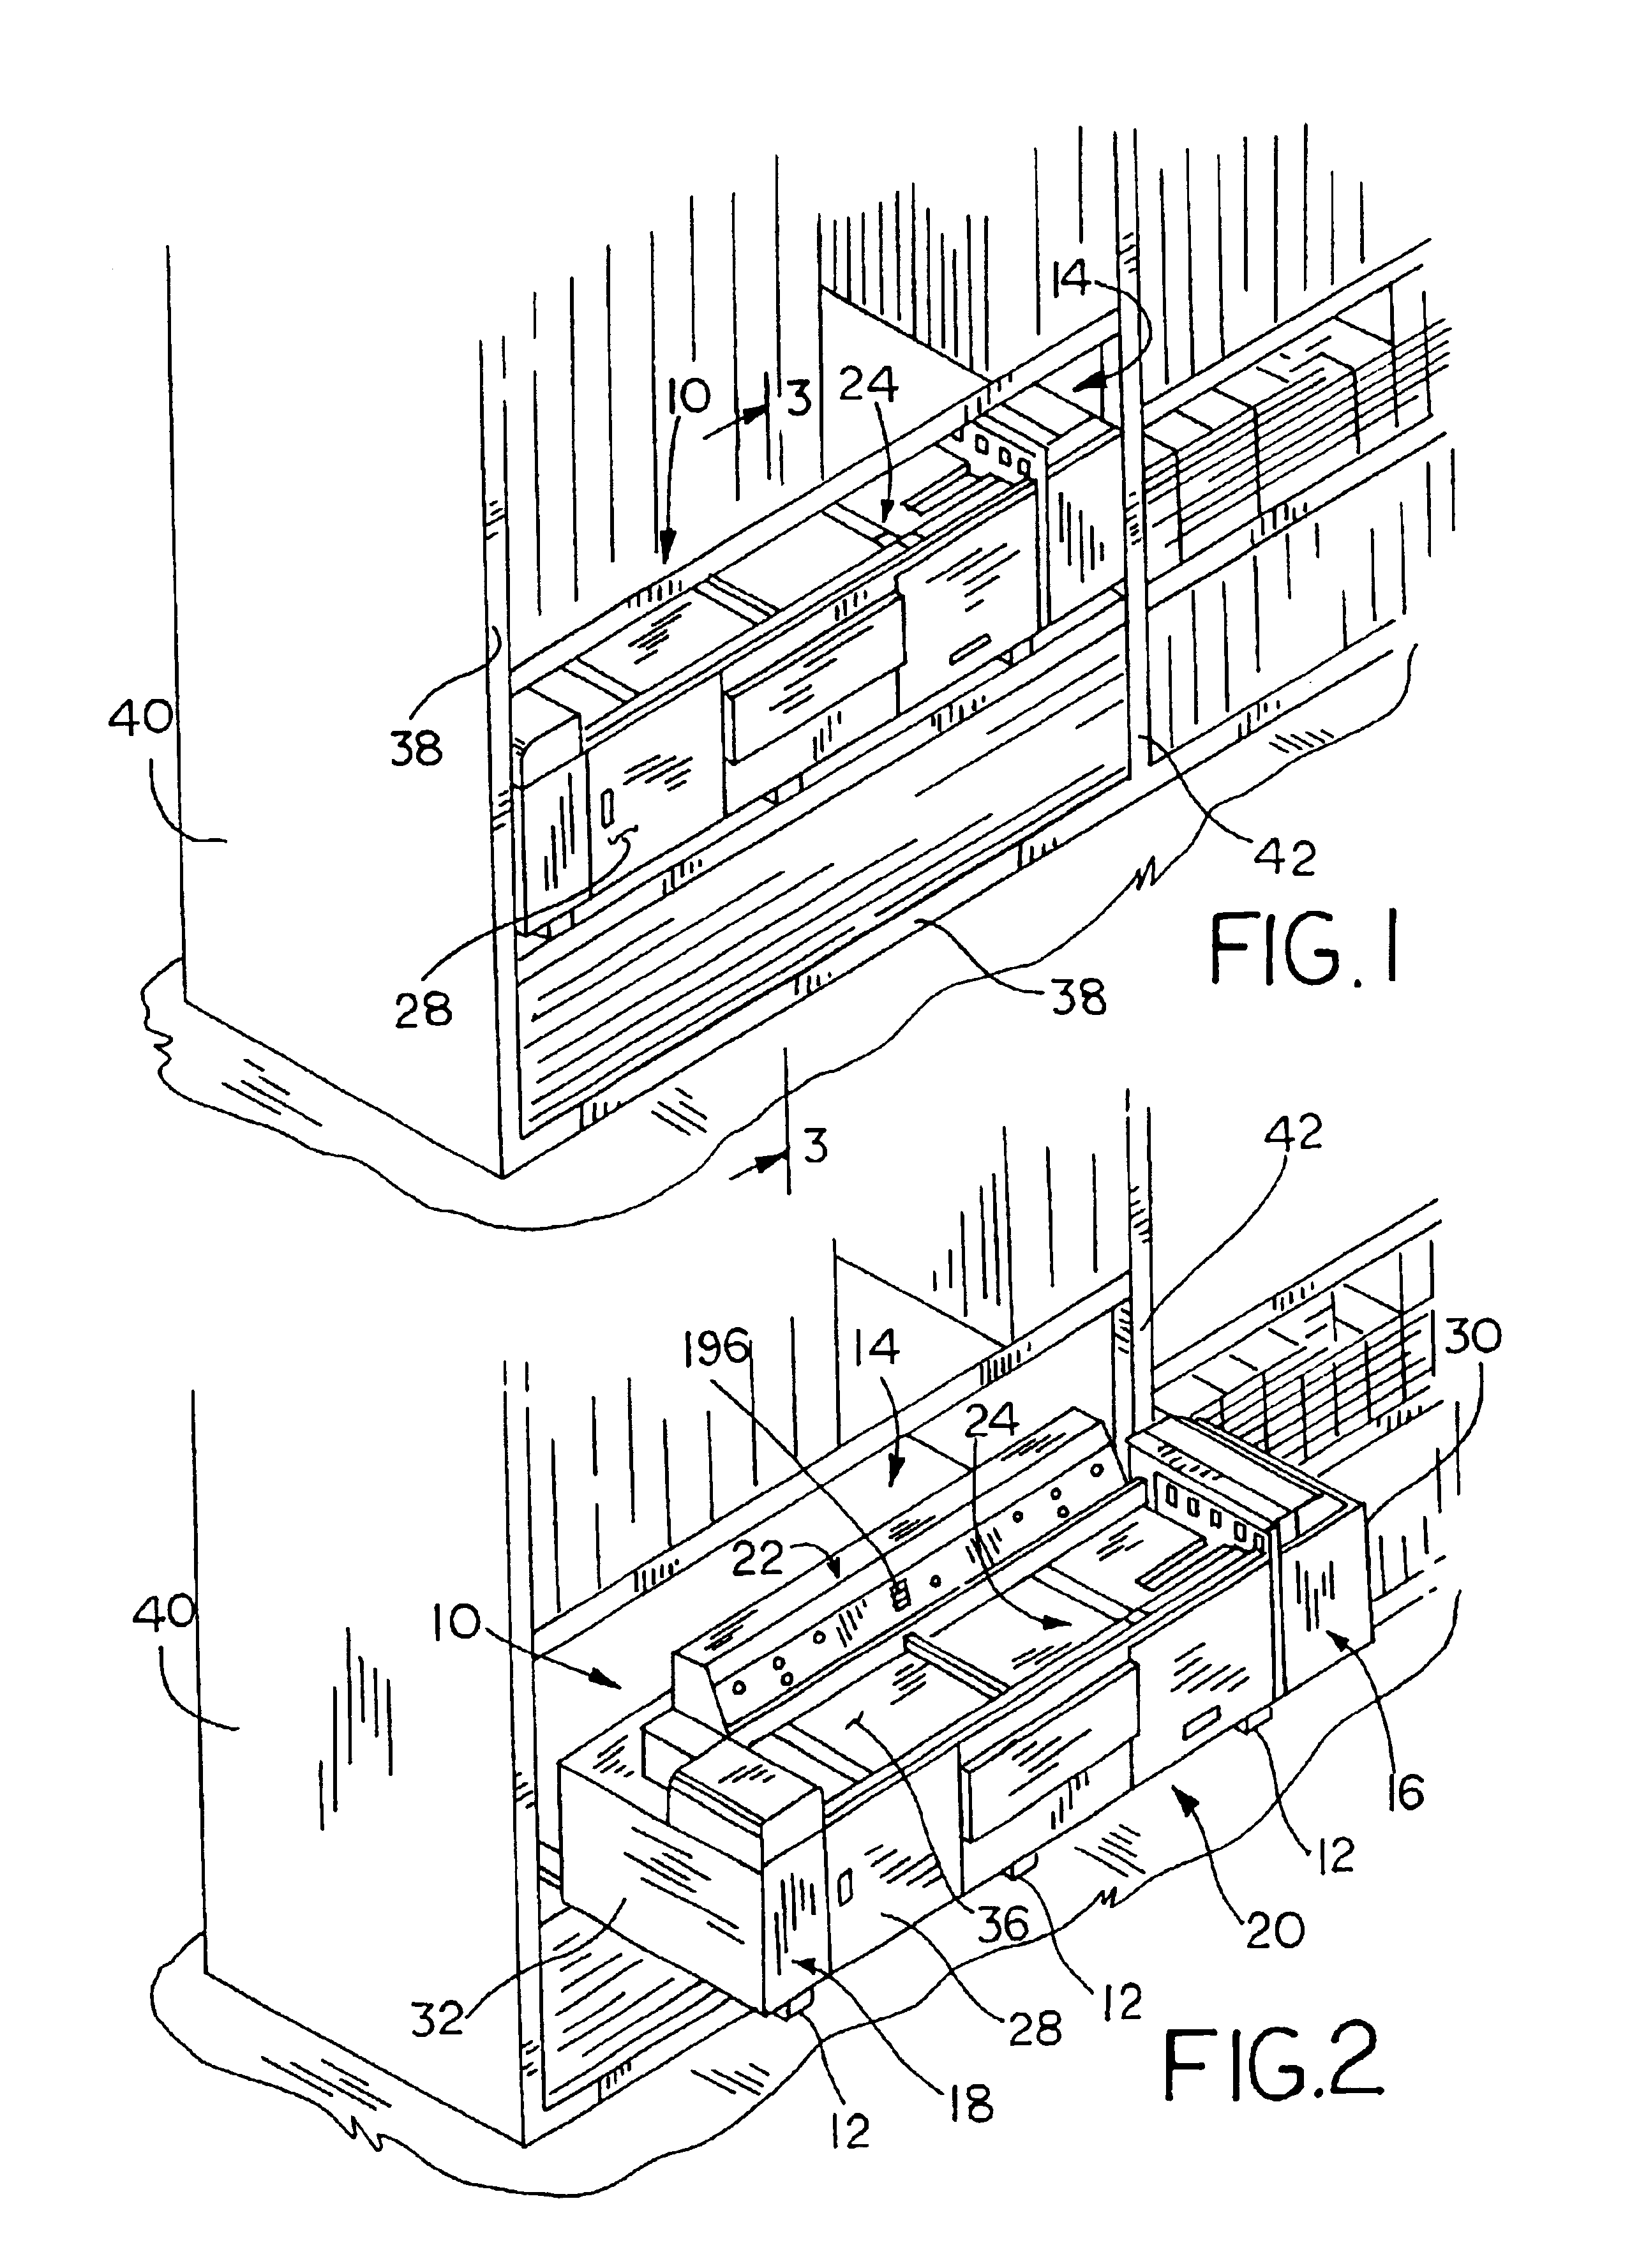 Method of positioning a window covering in a sizing mechanism